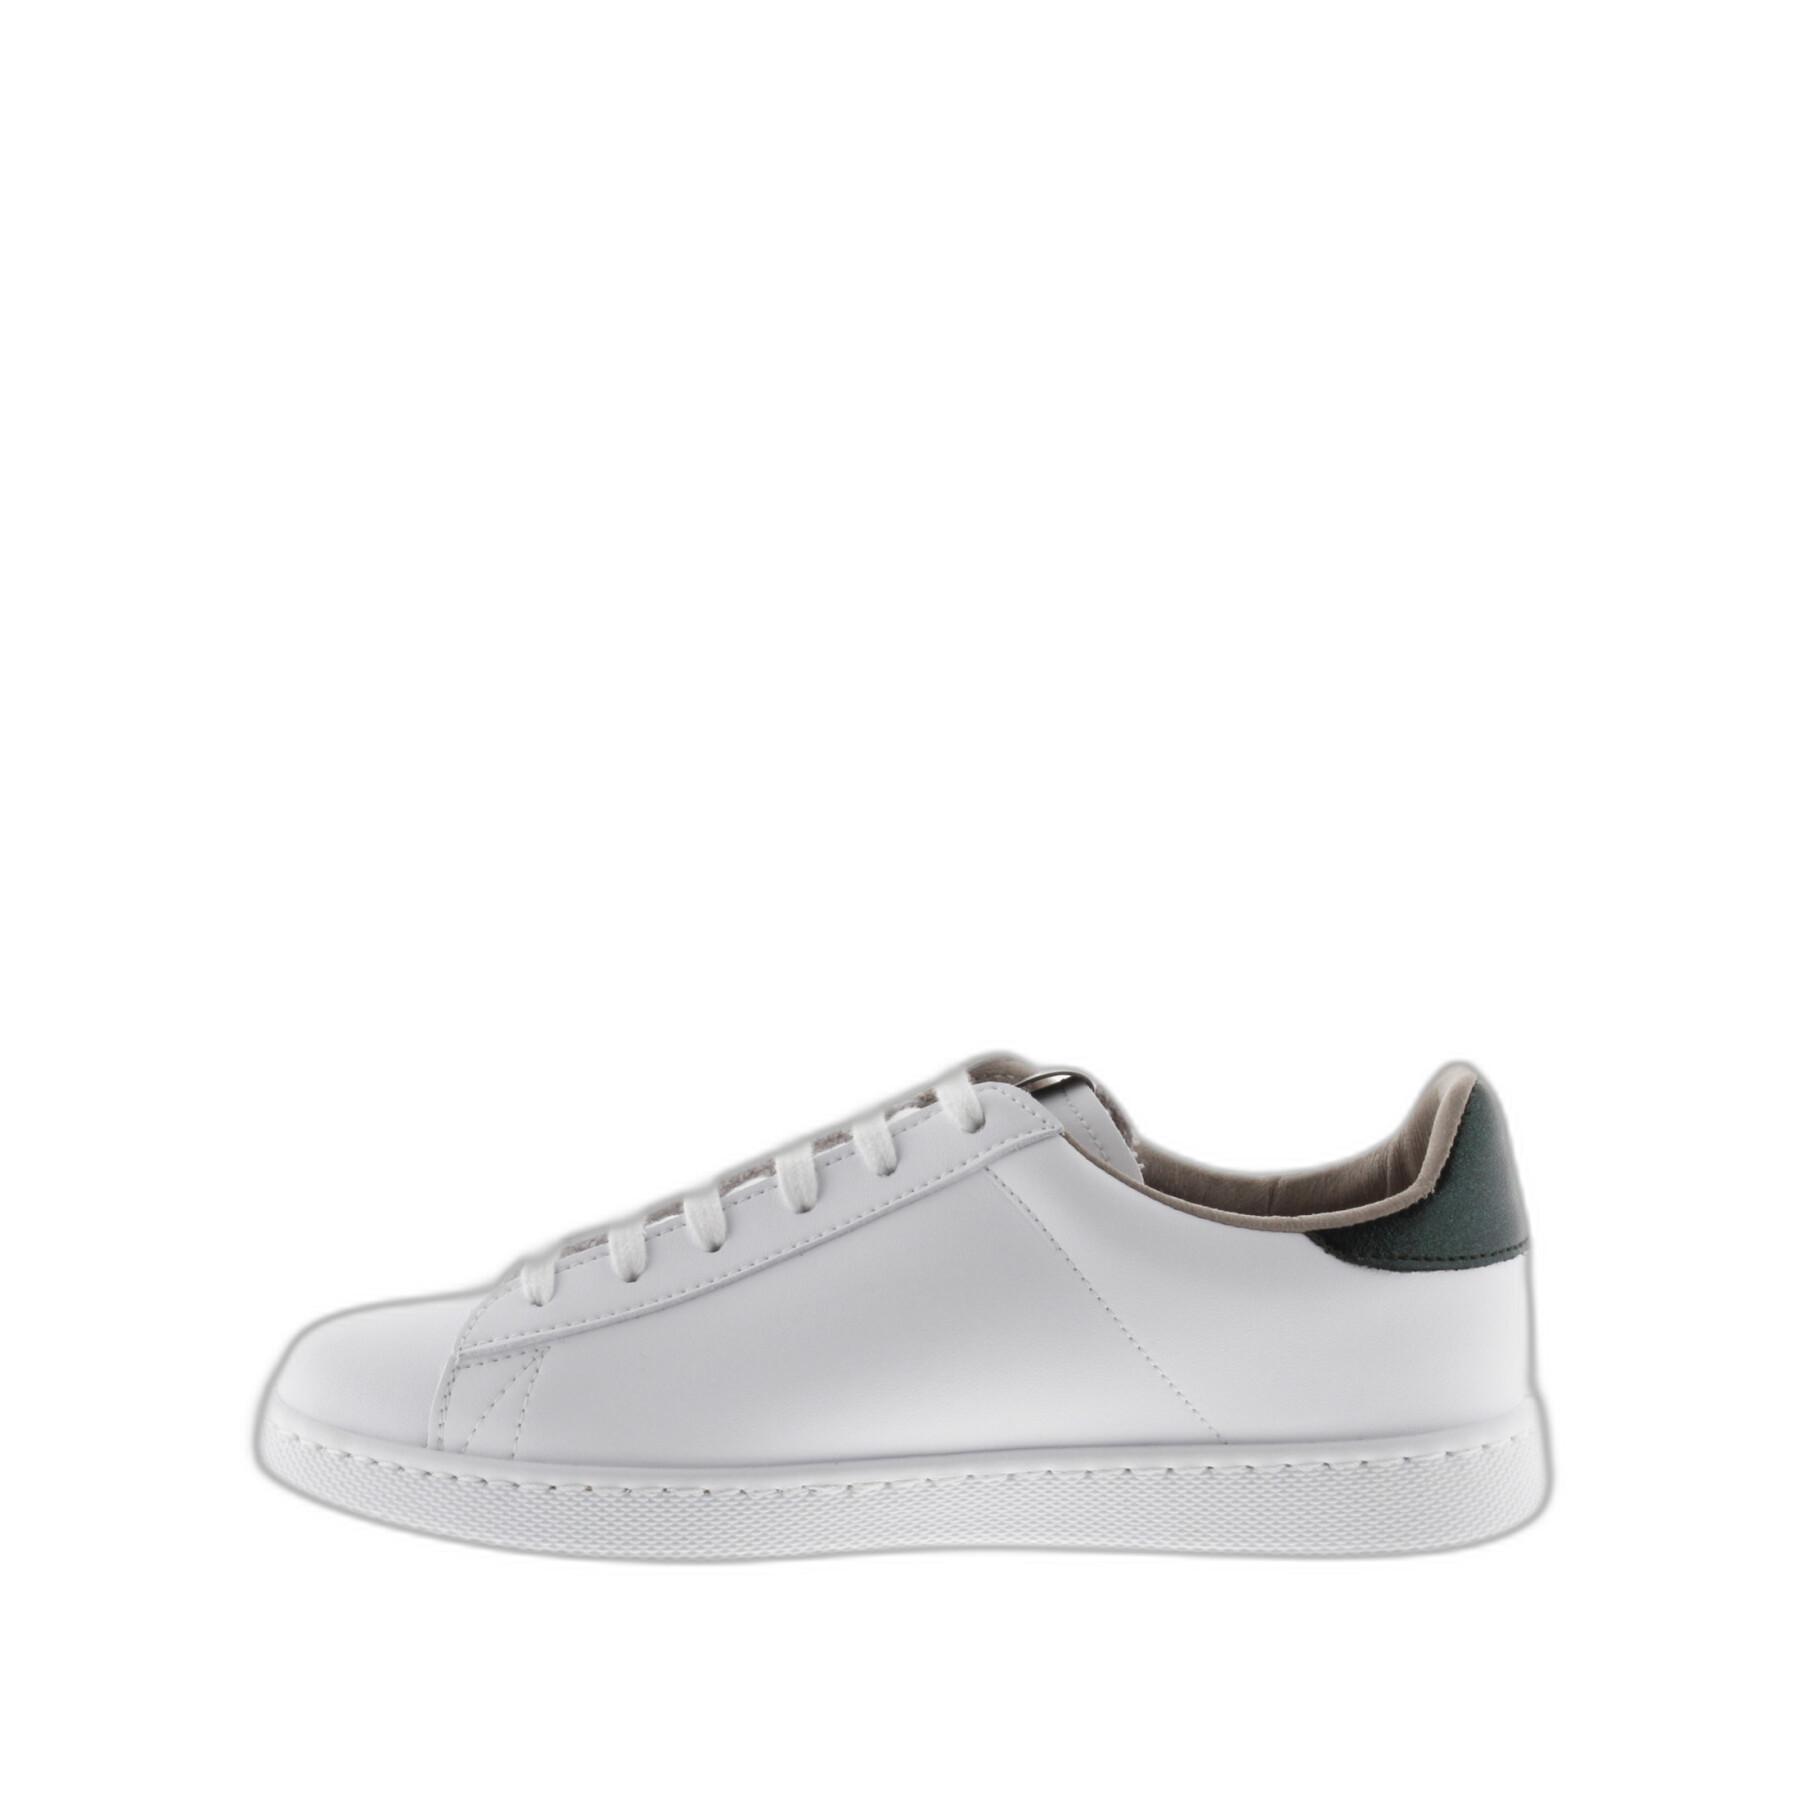 Leather effect sneakers for women Victoria